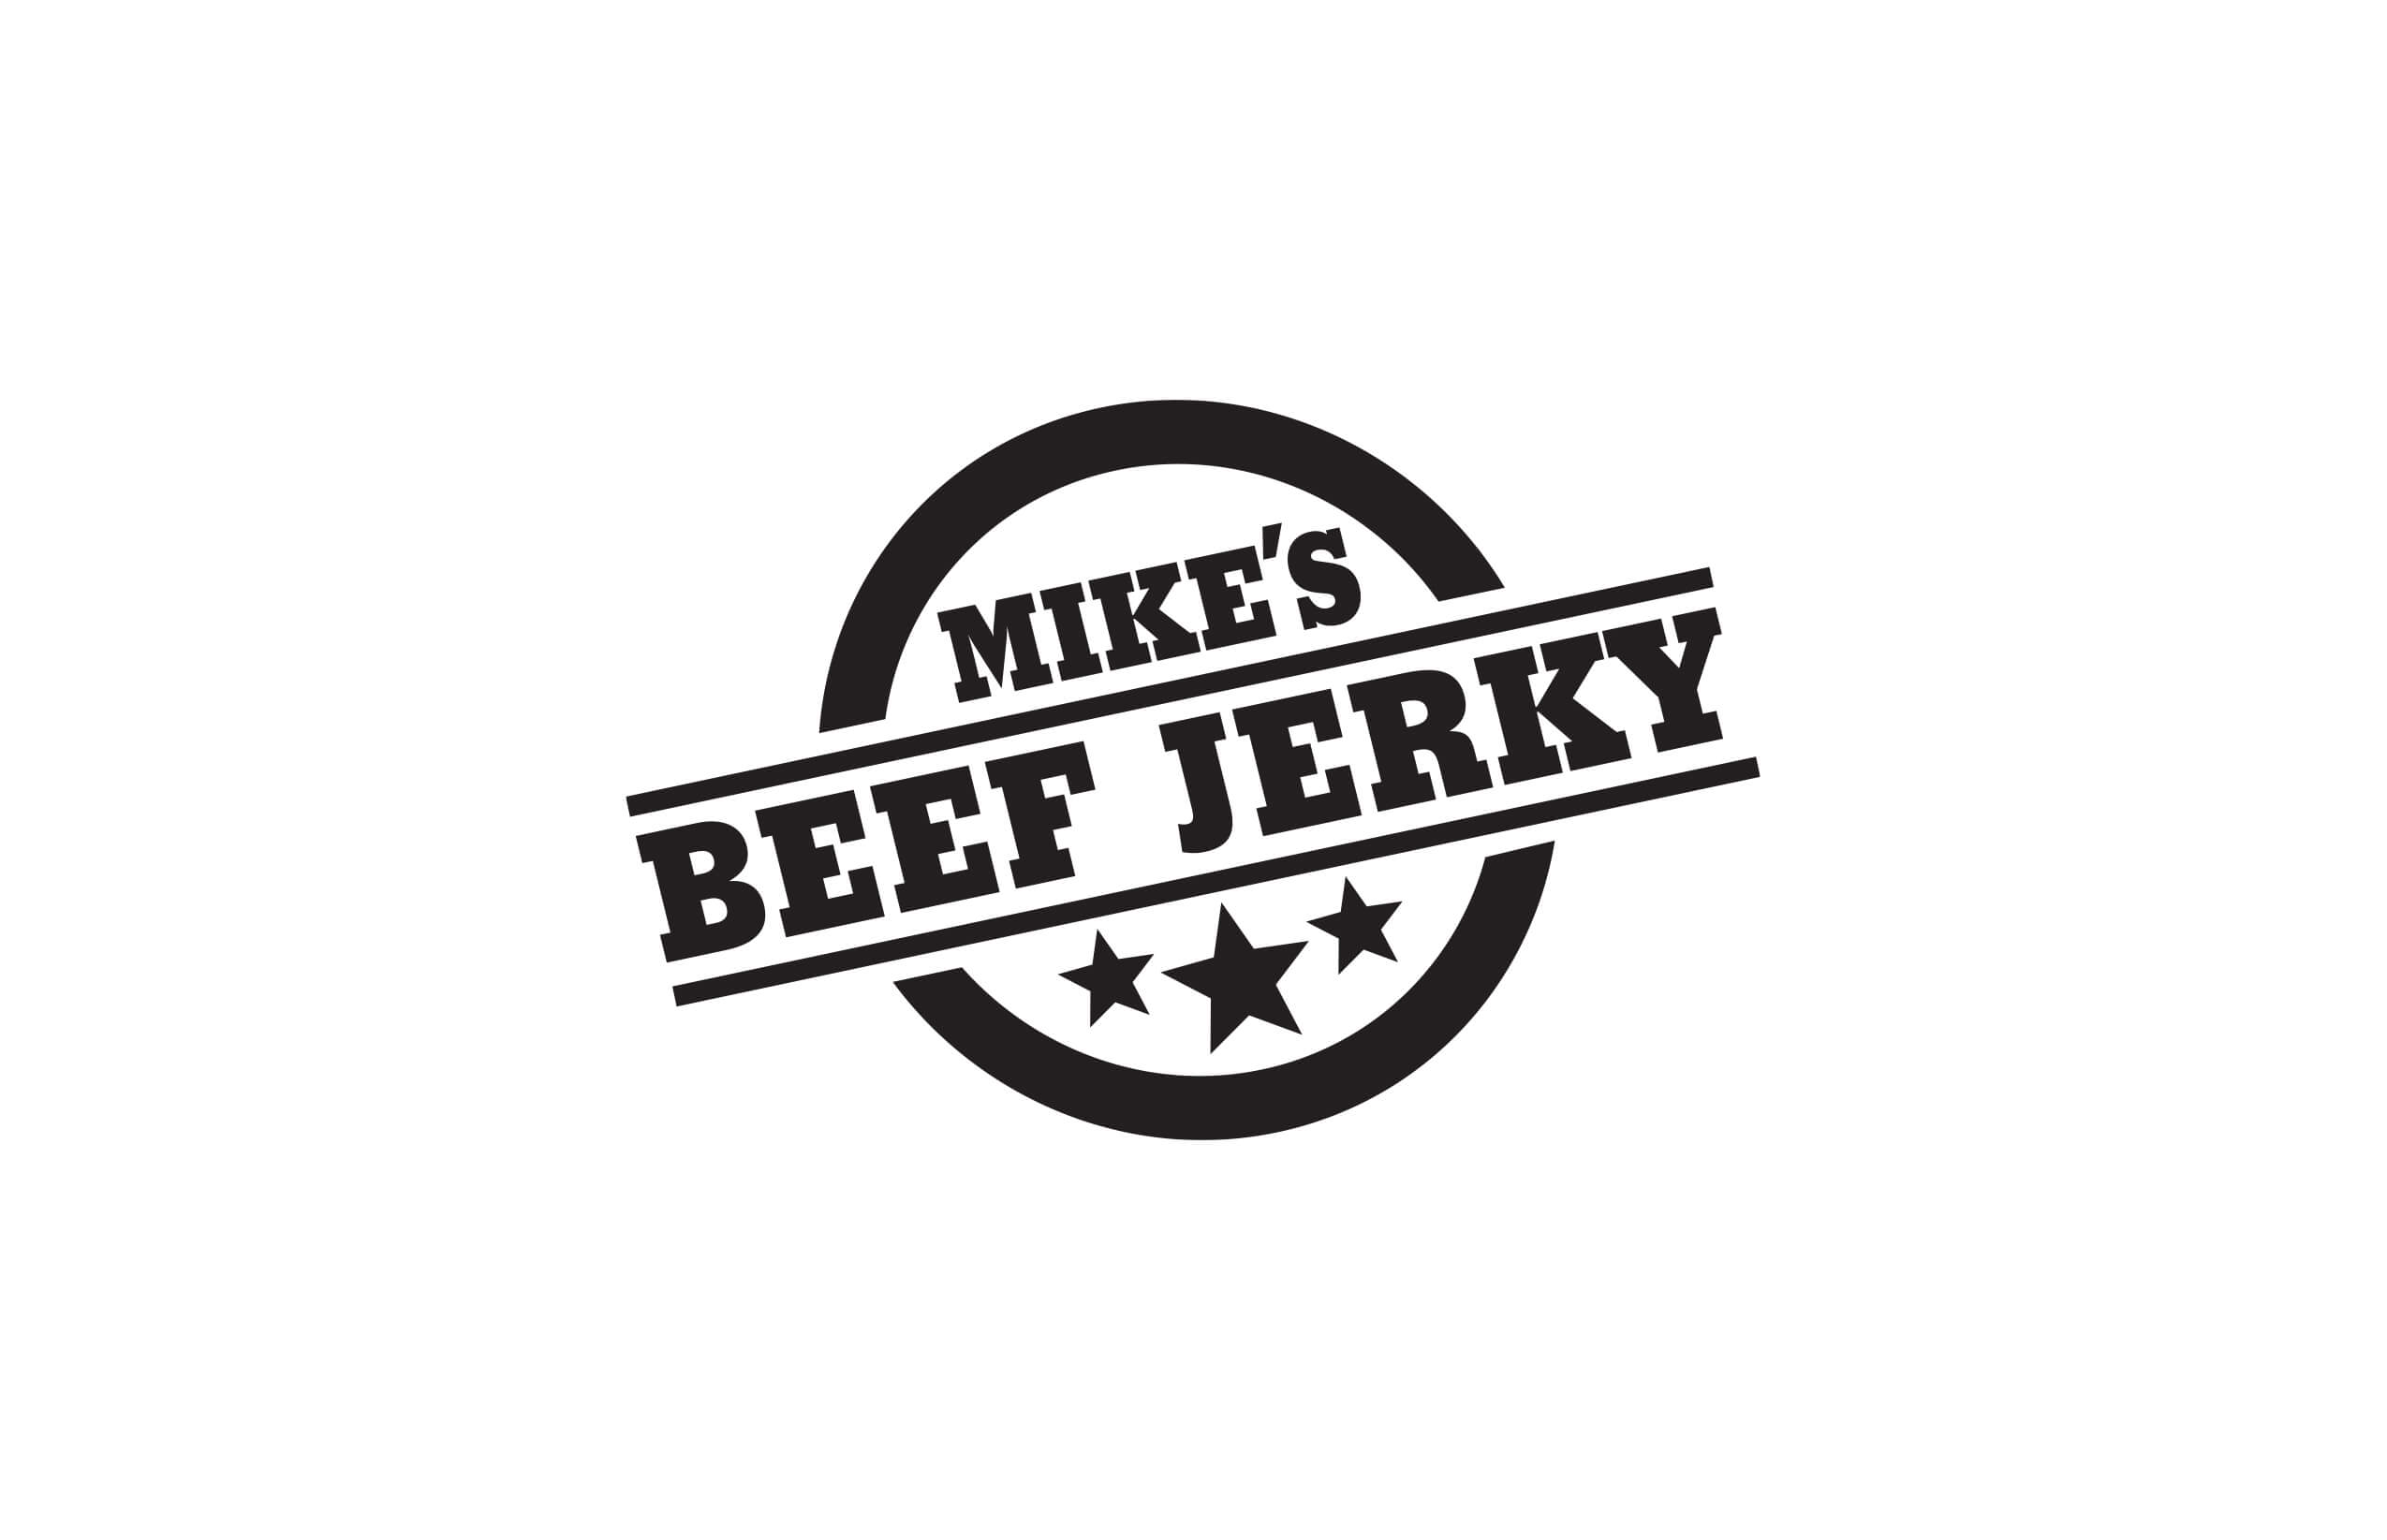 Icon Web Design Adelaide. Image of Mike's Beef Jerky logo.